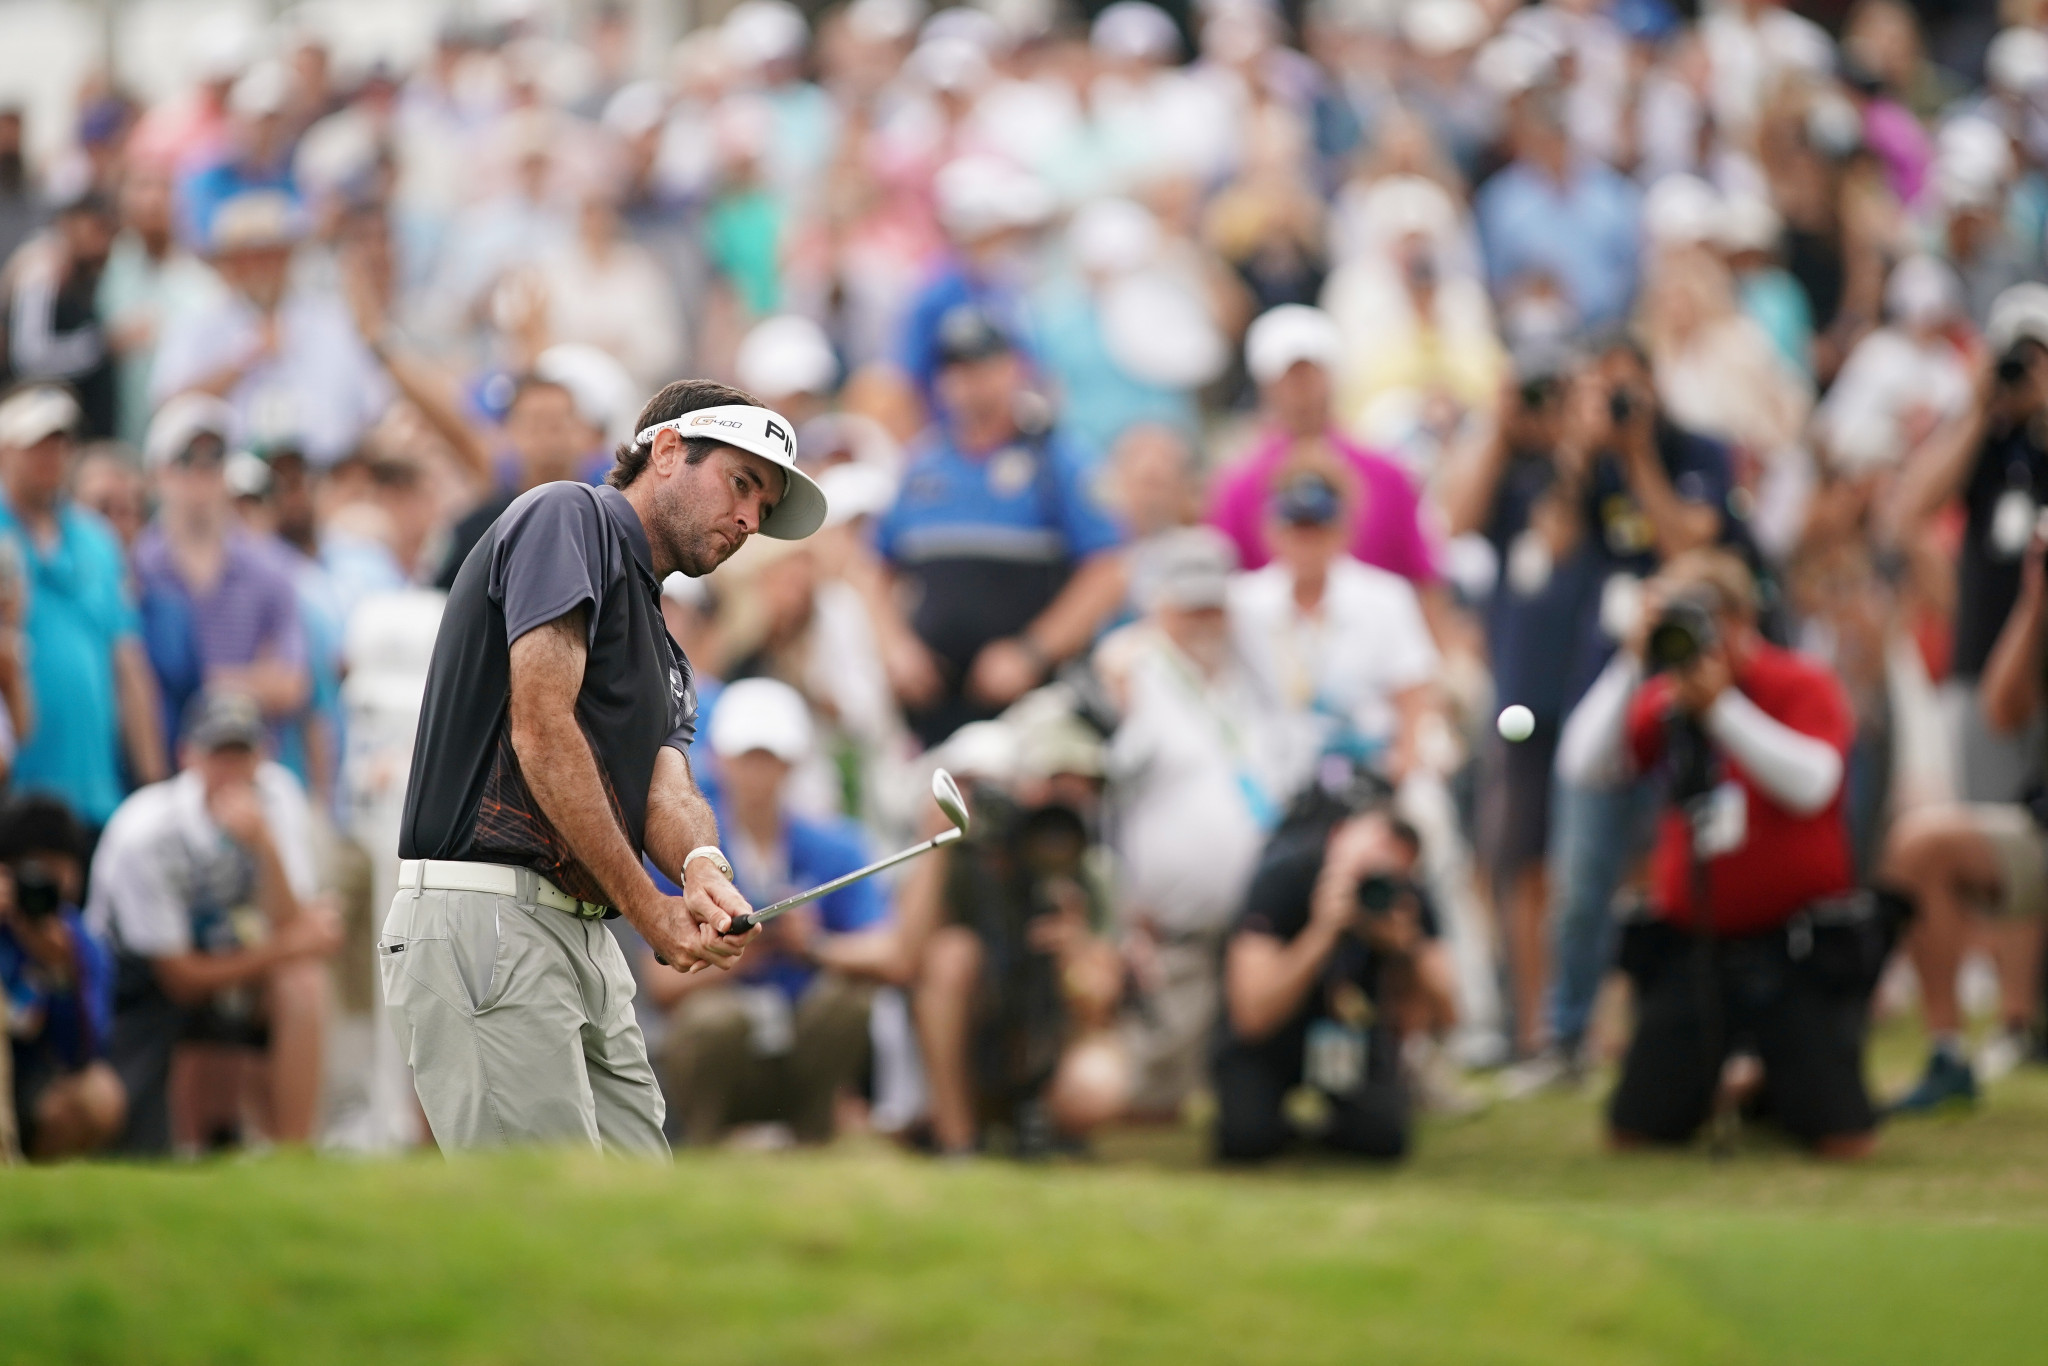 Watson secures WGC Match Play title with dominant win over Kisner